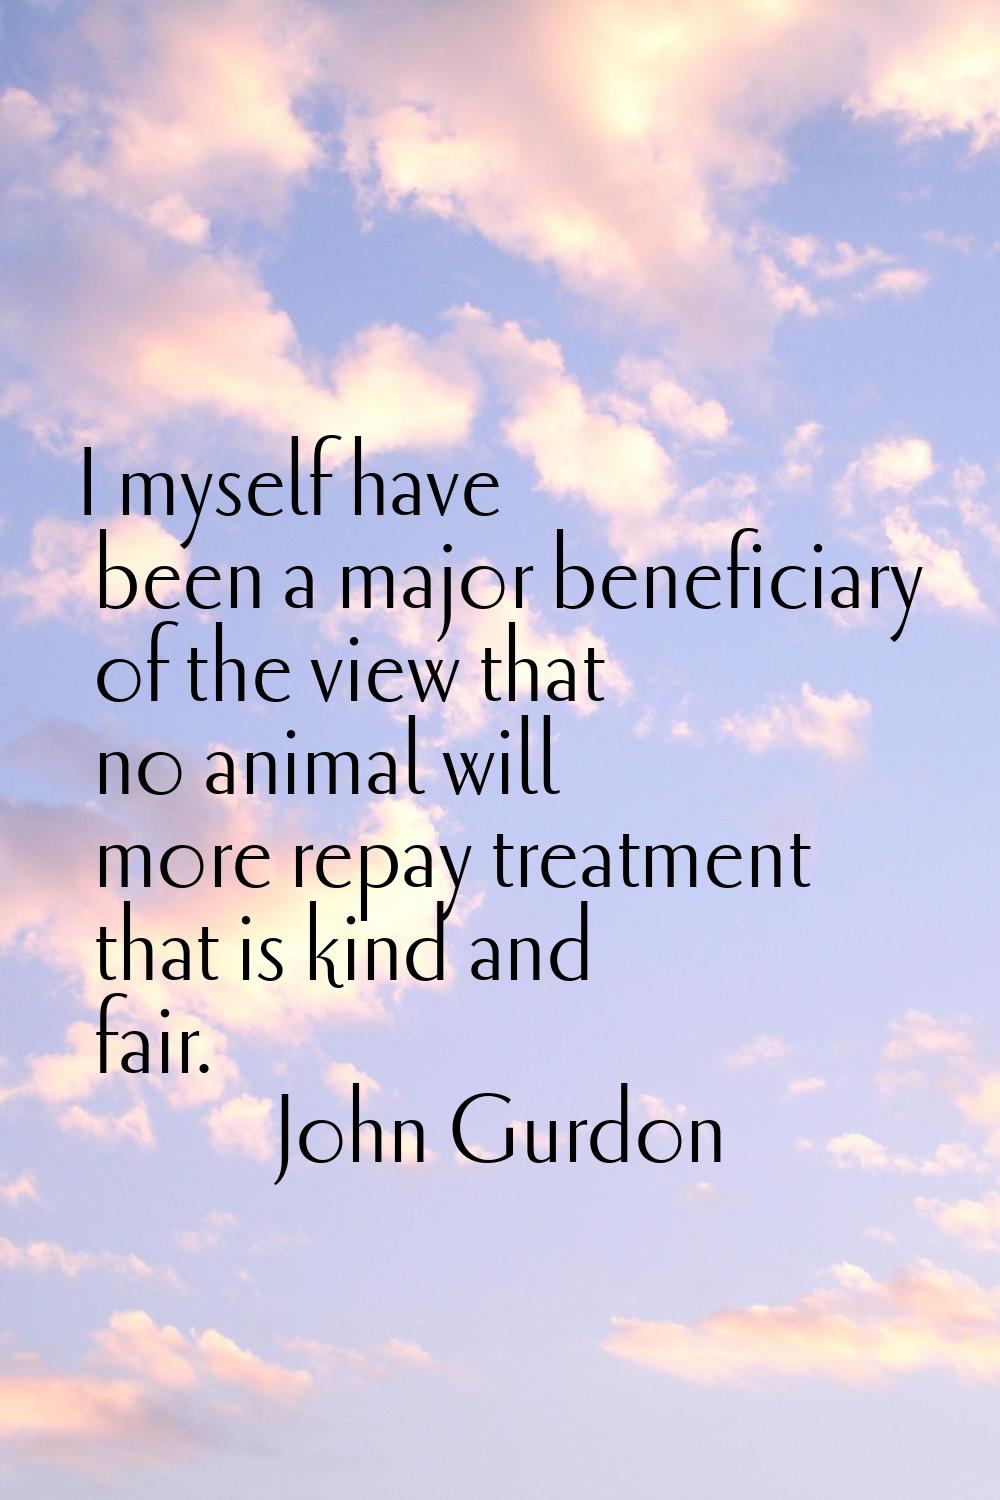 I myself have been a major beneficiary of the view that no animal will more repay treatment that is